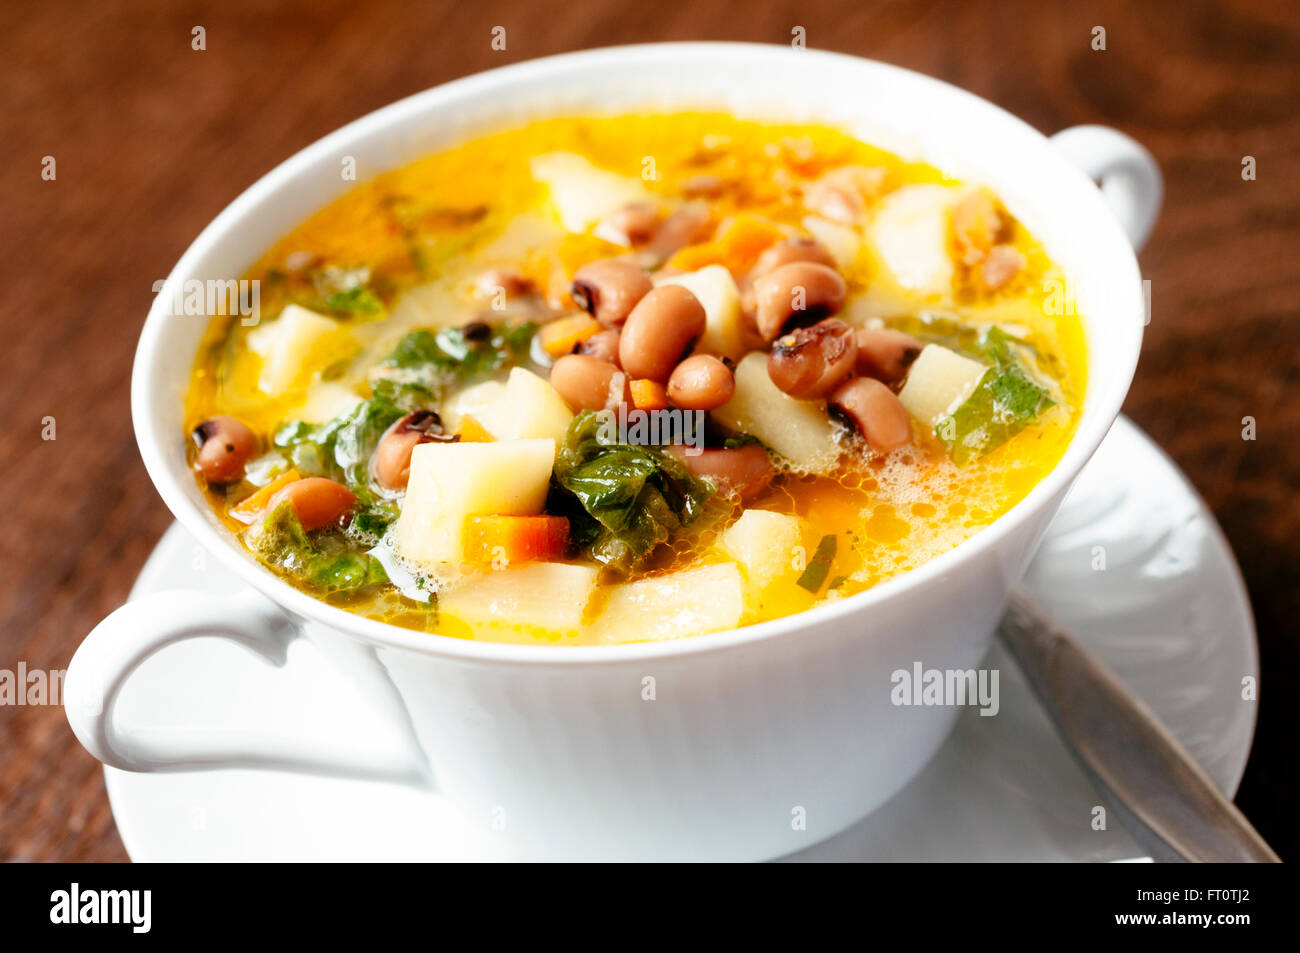 Bowl with a parsnip, escarole endive and black-eyed bean soup. Stock Photo